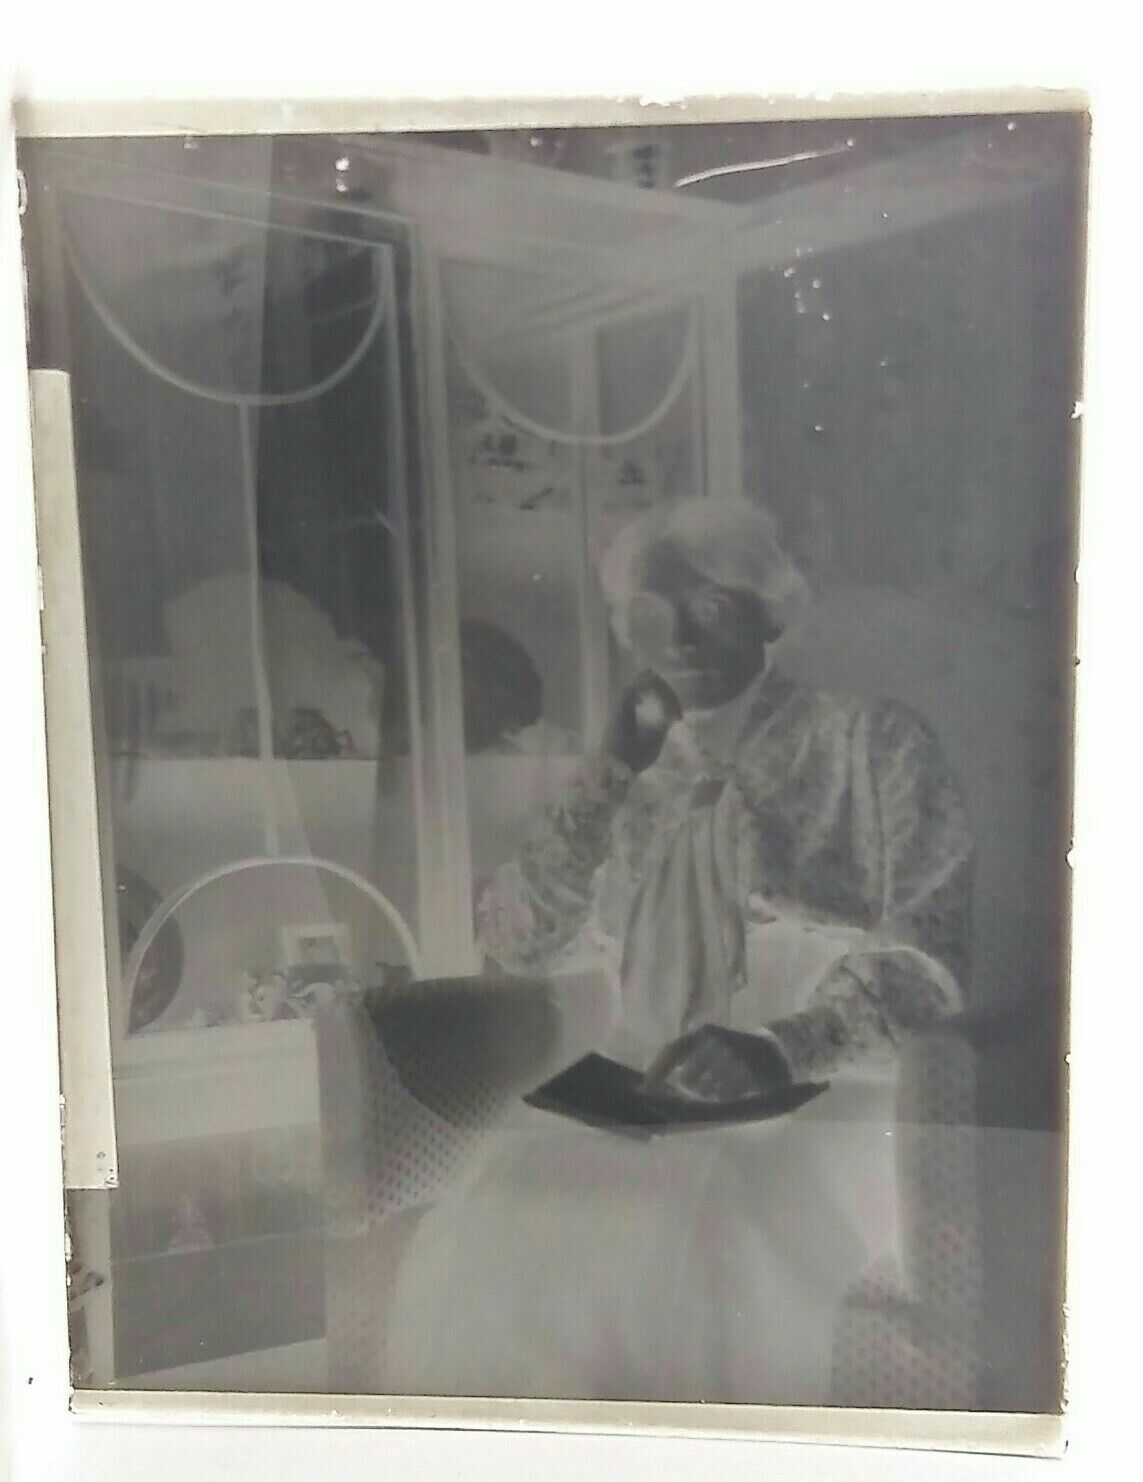 Antique Negative Glass Plate Photo Elderly Lady Reading A Book c1900 -1920 